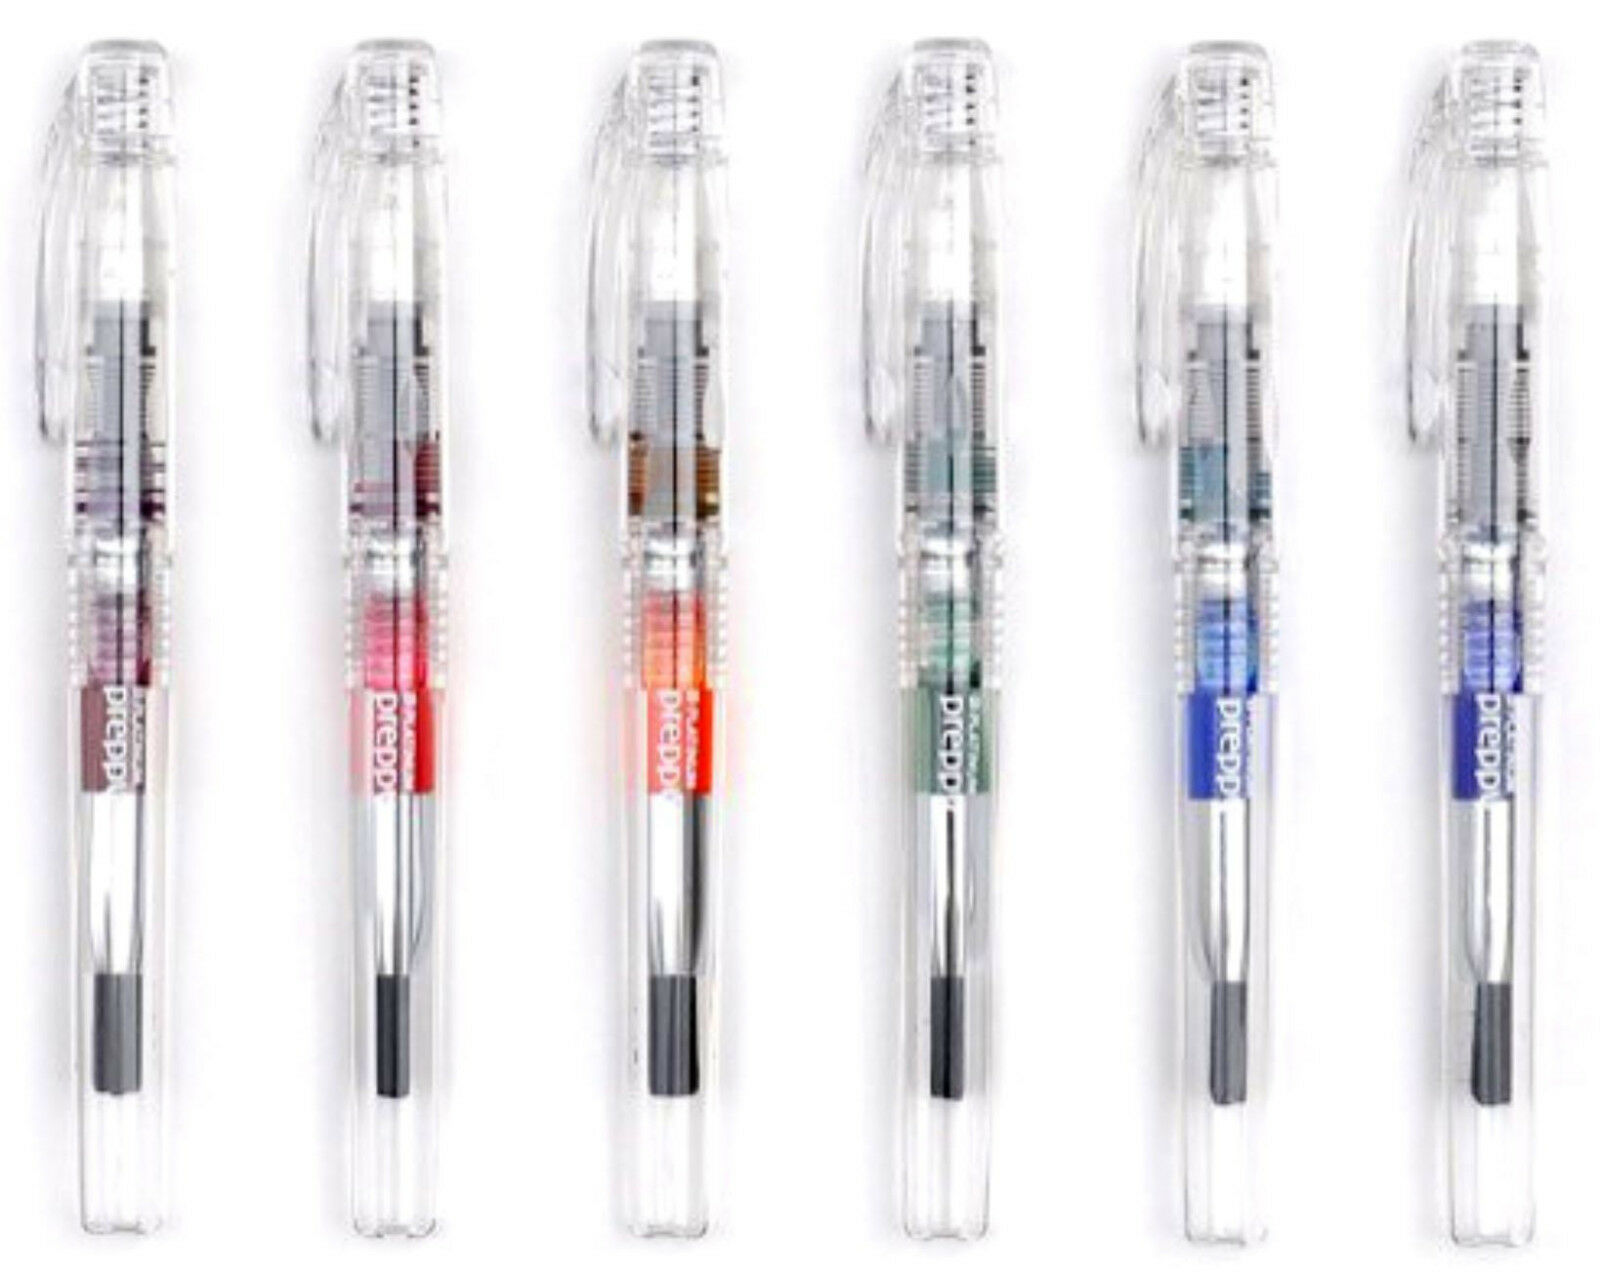 https://www.mangaarts.com.au/shop/wp-content/uploads/imported/9/Platinum-Preppy-Fountain-Pen-Crystal-Clear-body-03mm-Fine-tip-Tracking-283328153629-7.jpg